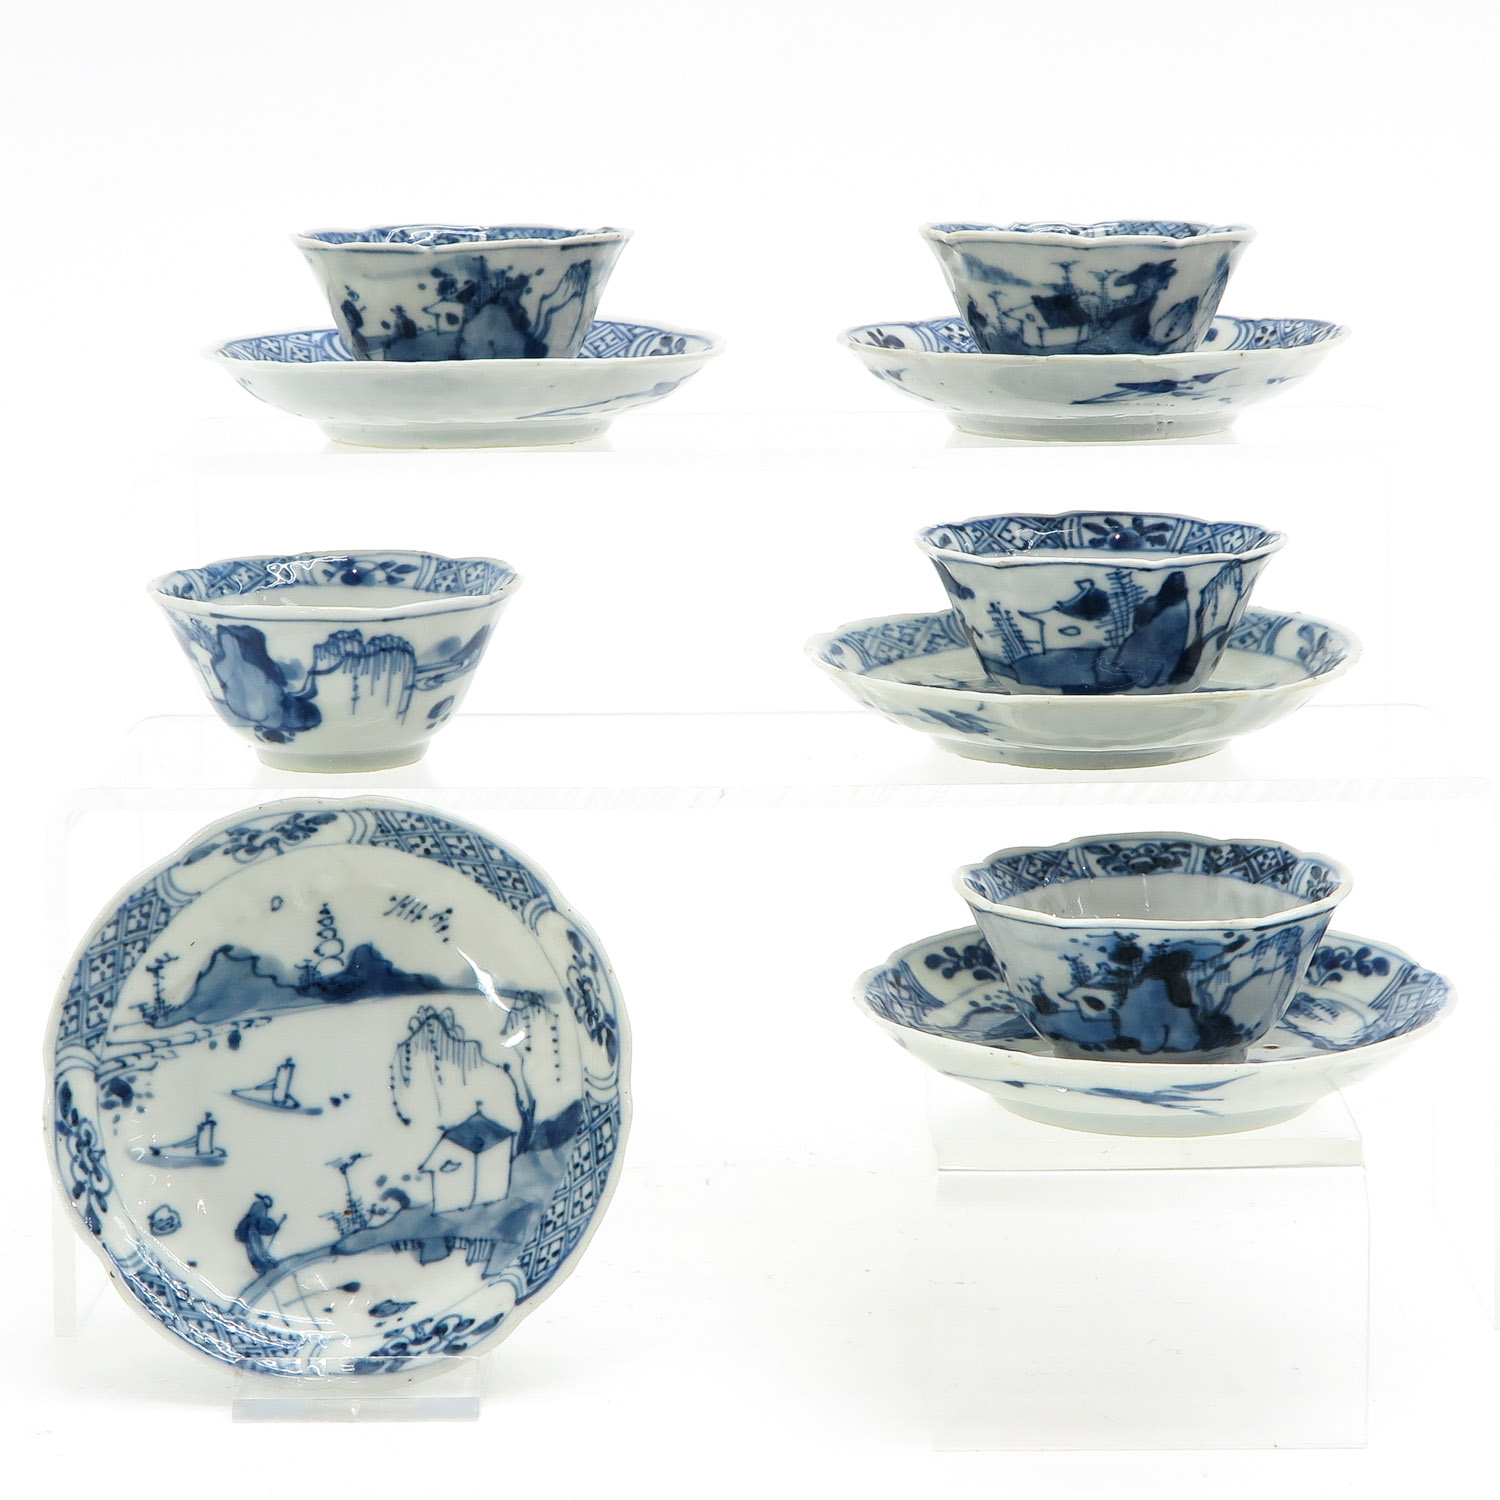 A Set of 5 Cups and Saucers